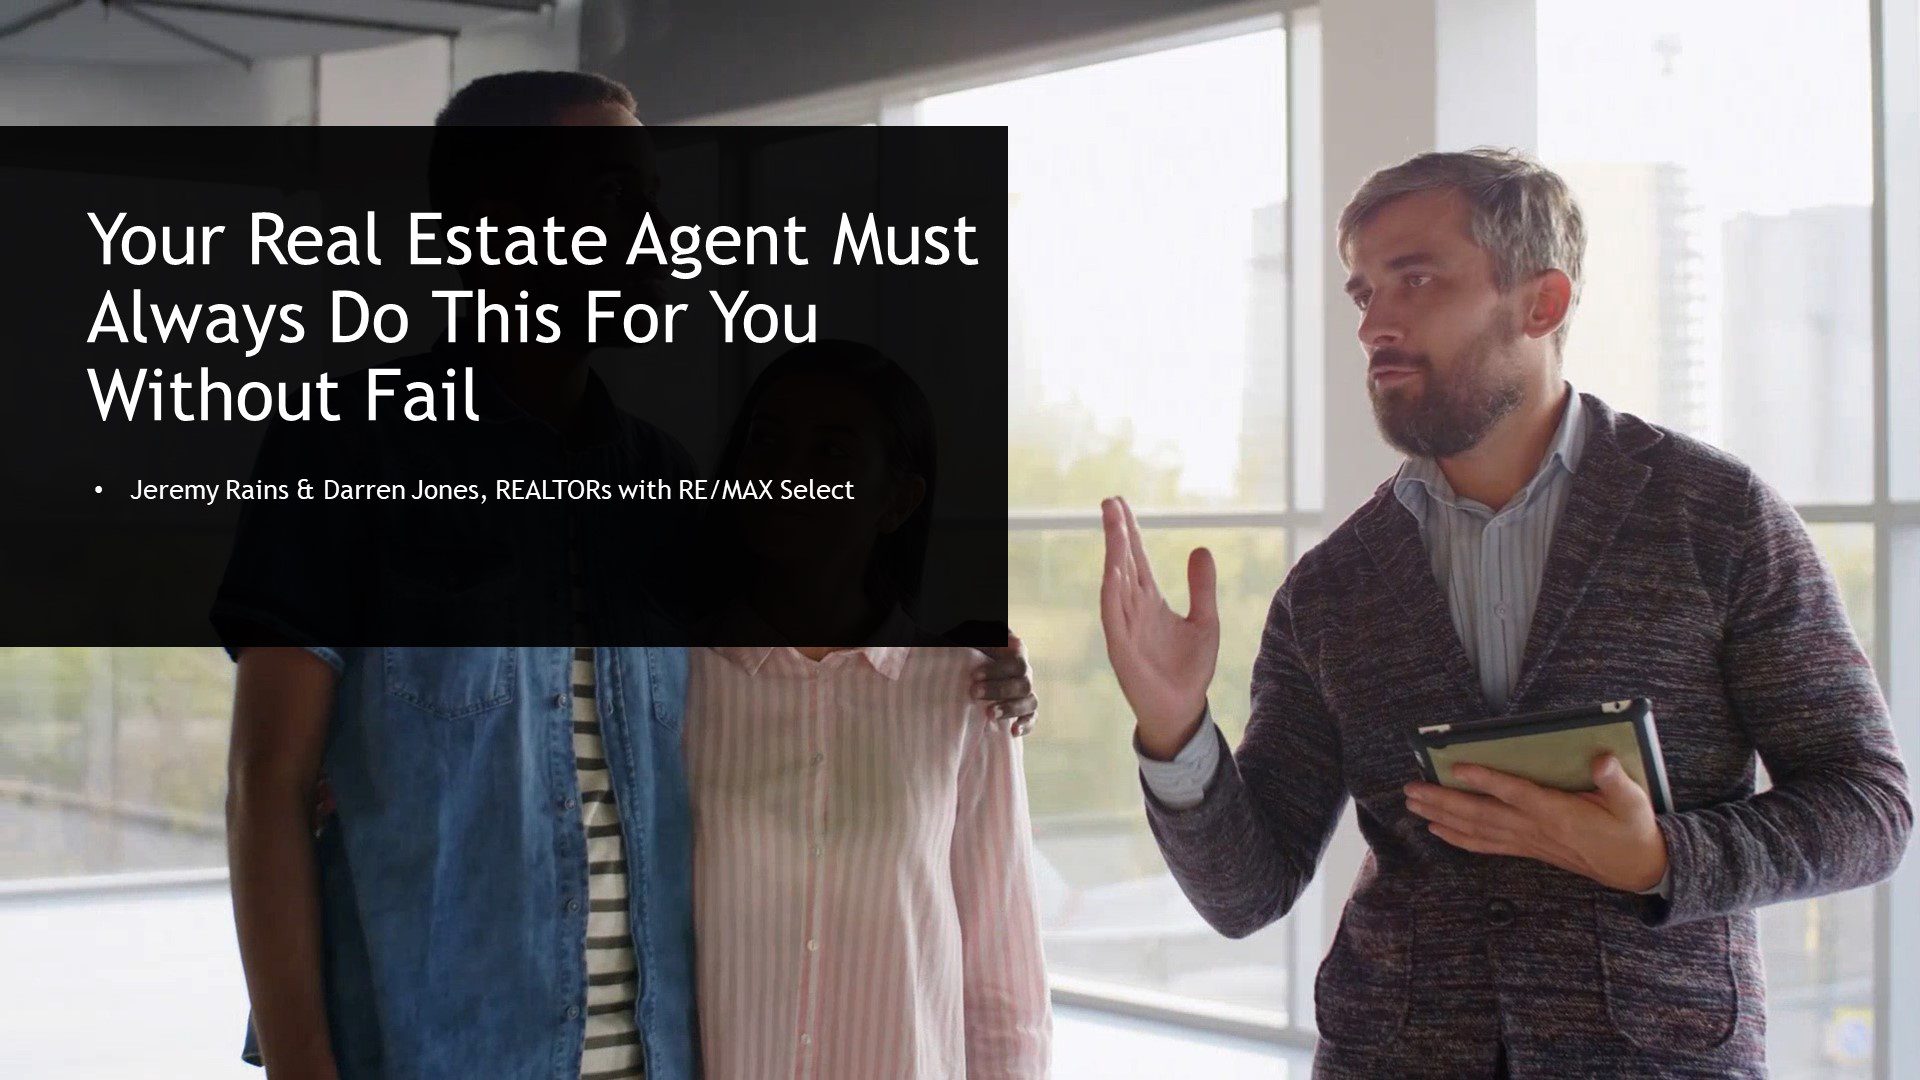 Your Real Estate Agent Must Do This For You Without Fail